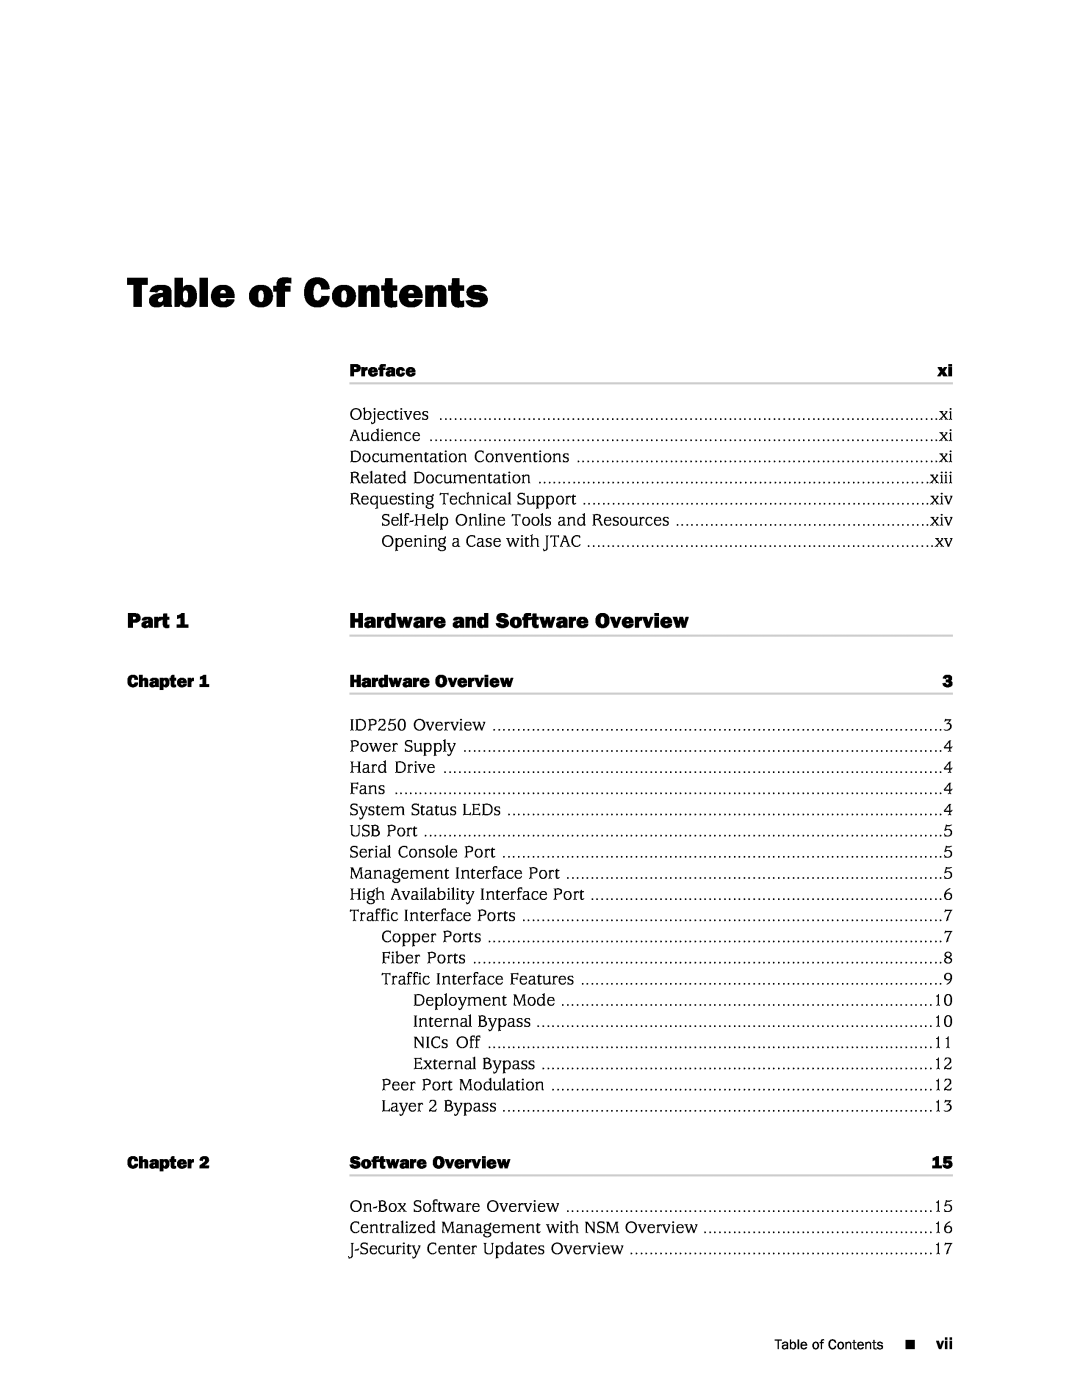 Juniper Networks IDP250 manual Table of Contents, Part, Hardware and Software Overview 